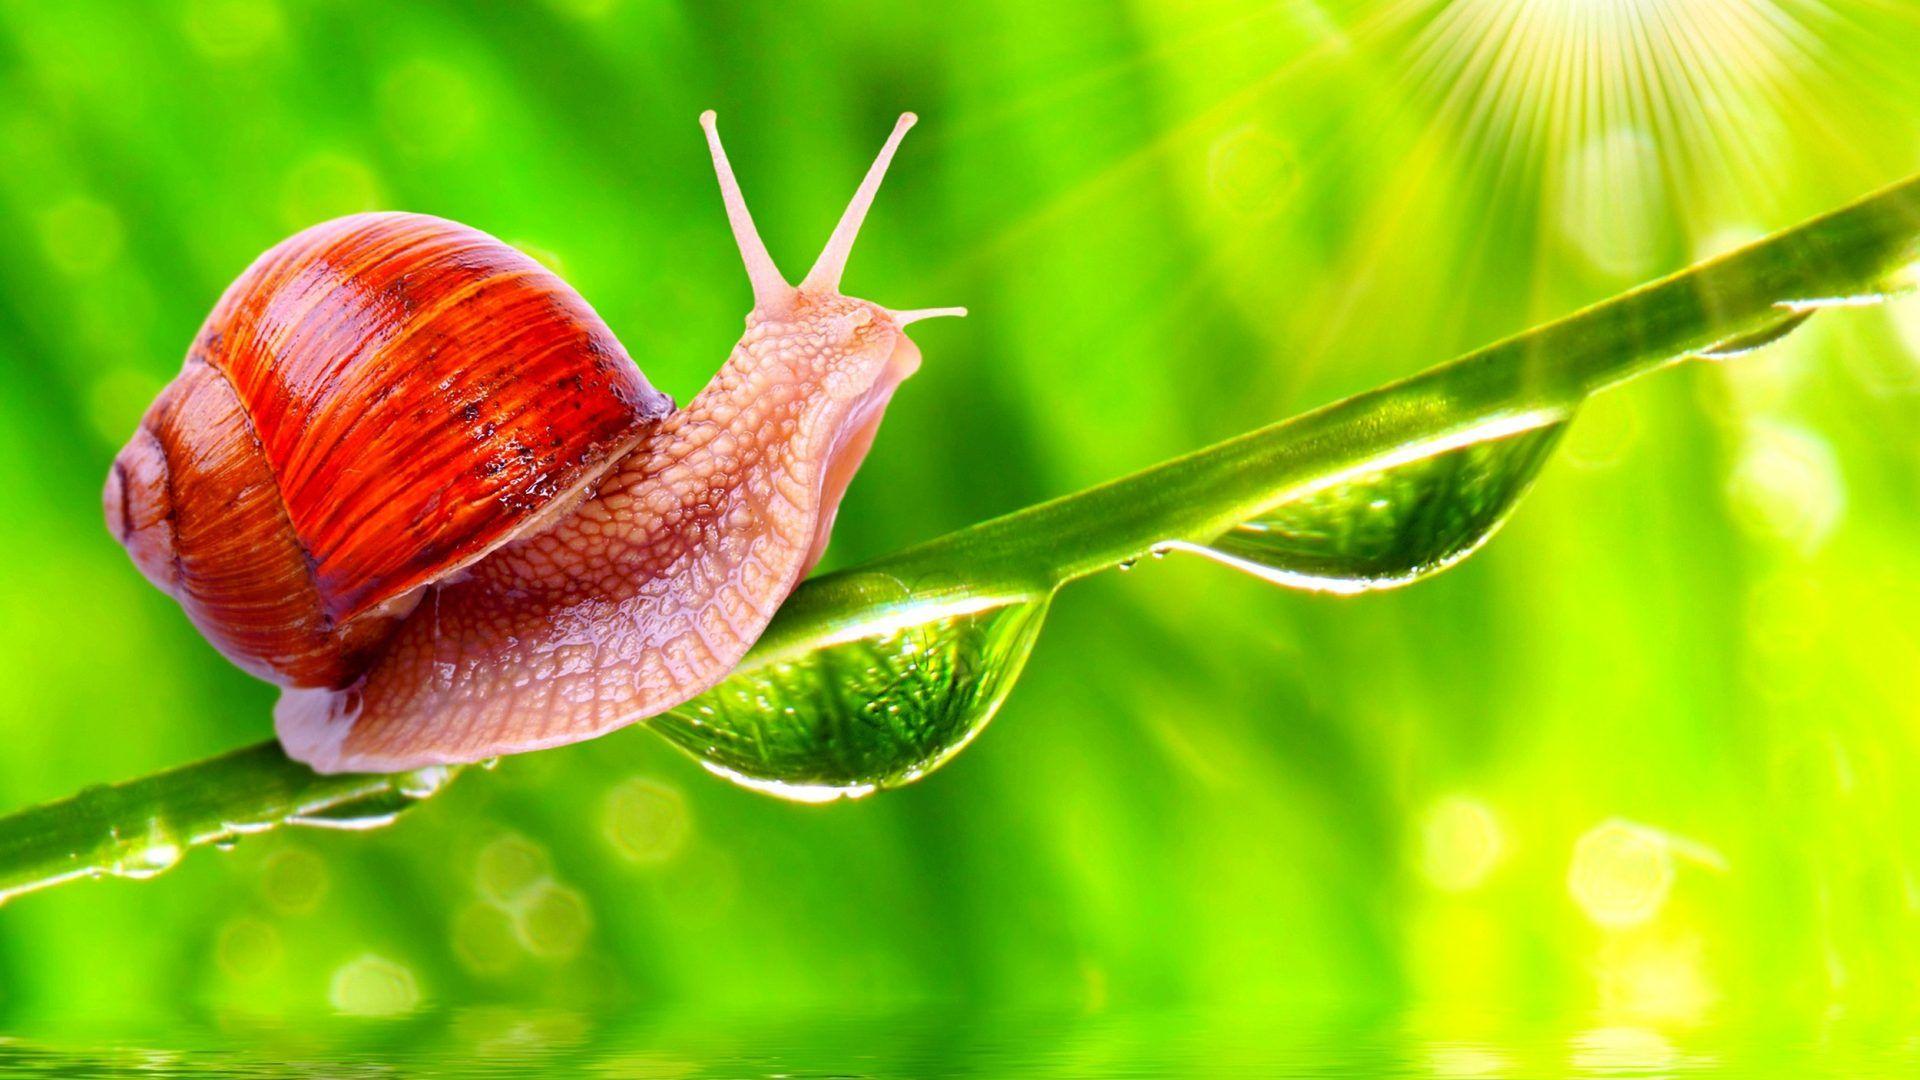 Snail Tag wallpaper: Snail Animals Seasons Birds Forests Creative